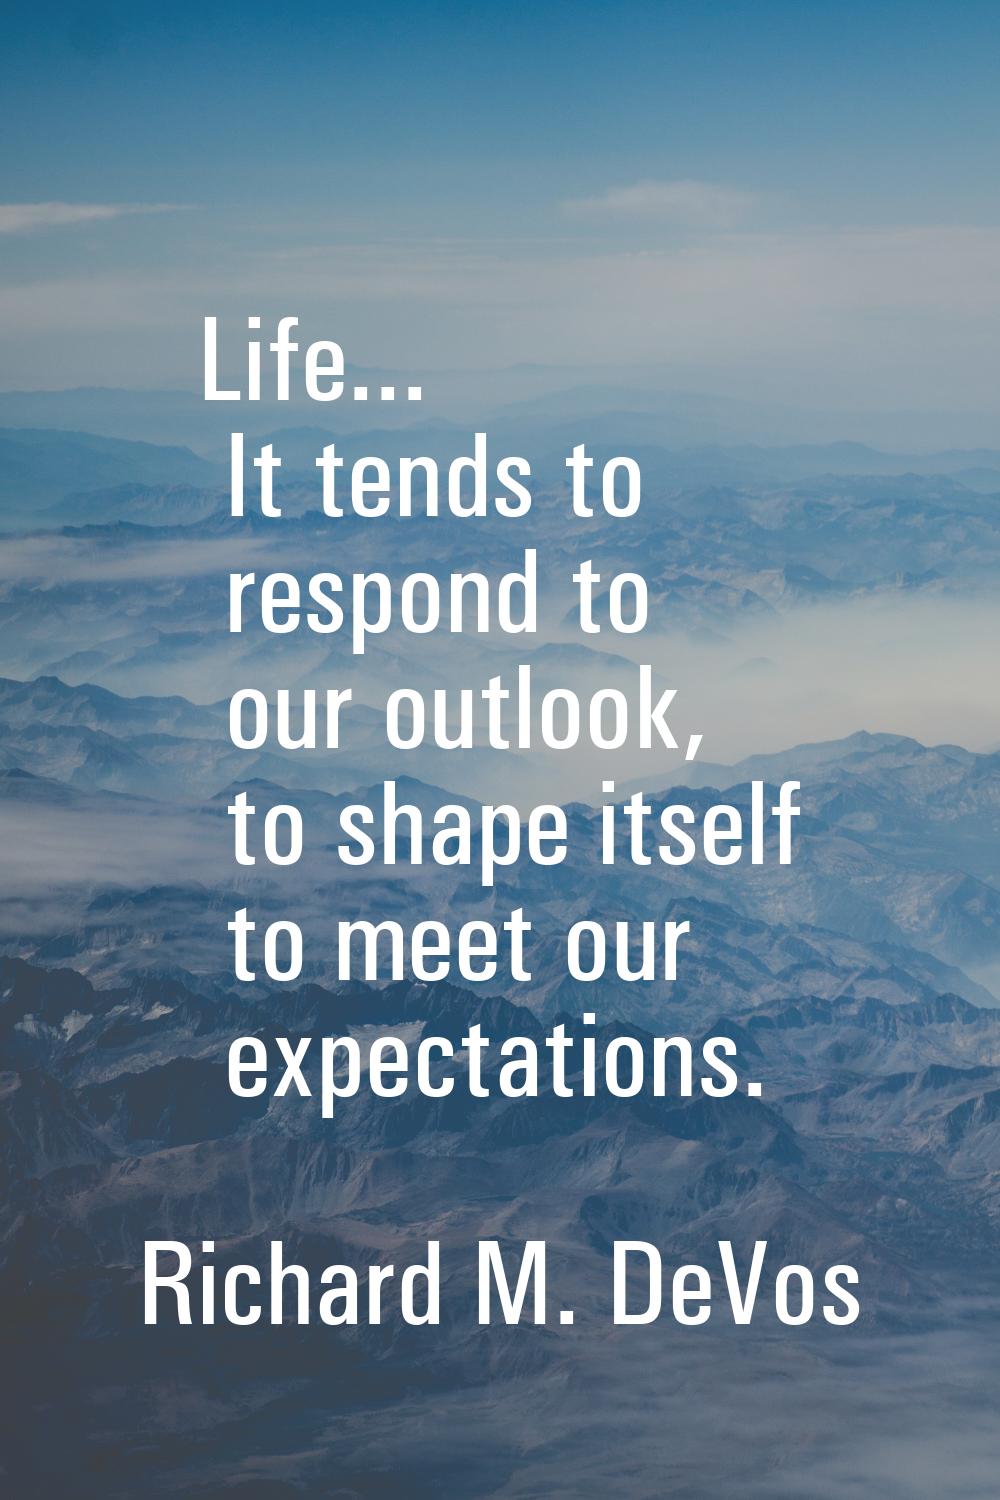 Life... It tends to respond to our outlook, to shape itself to meet our expectations.